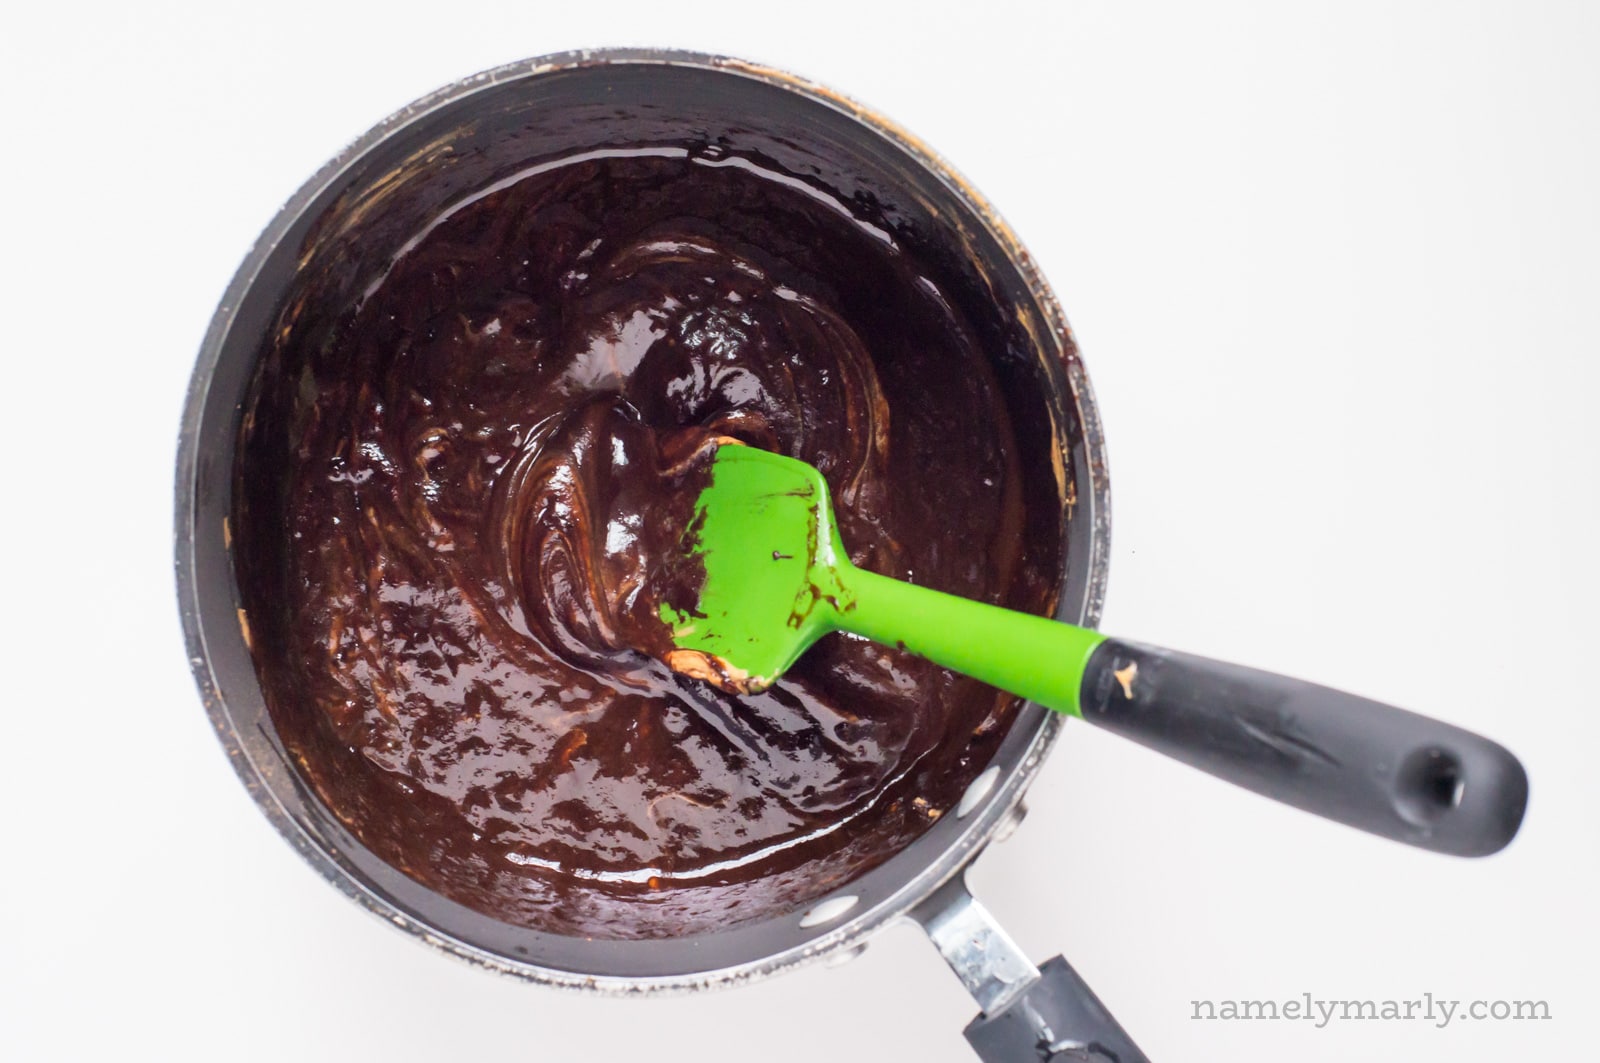 A saucepan is full of chocolate batter. A green spatula is stirring the ingredients.